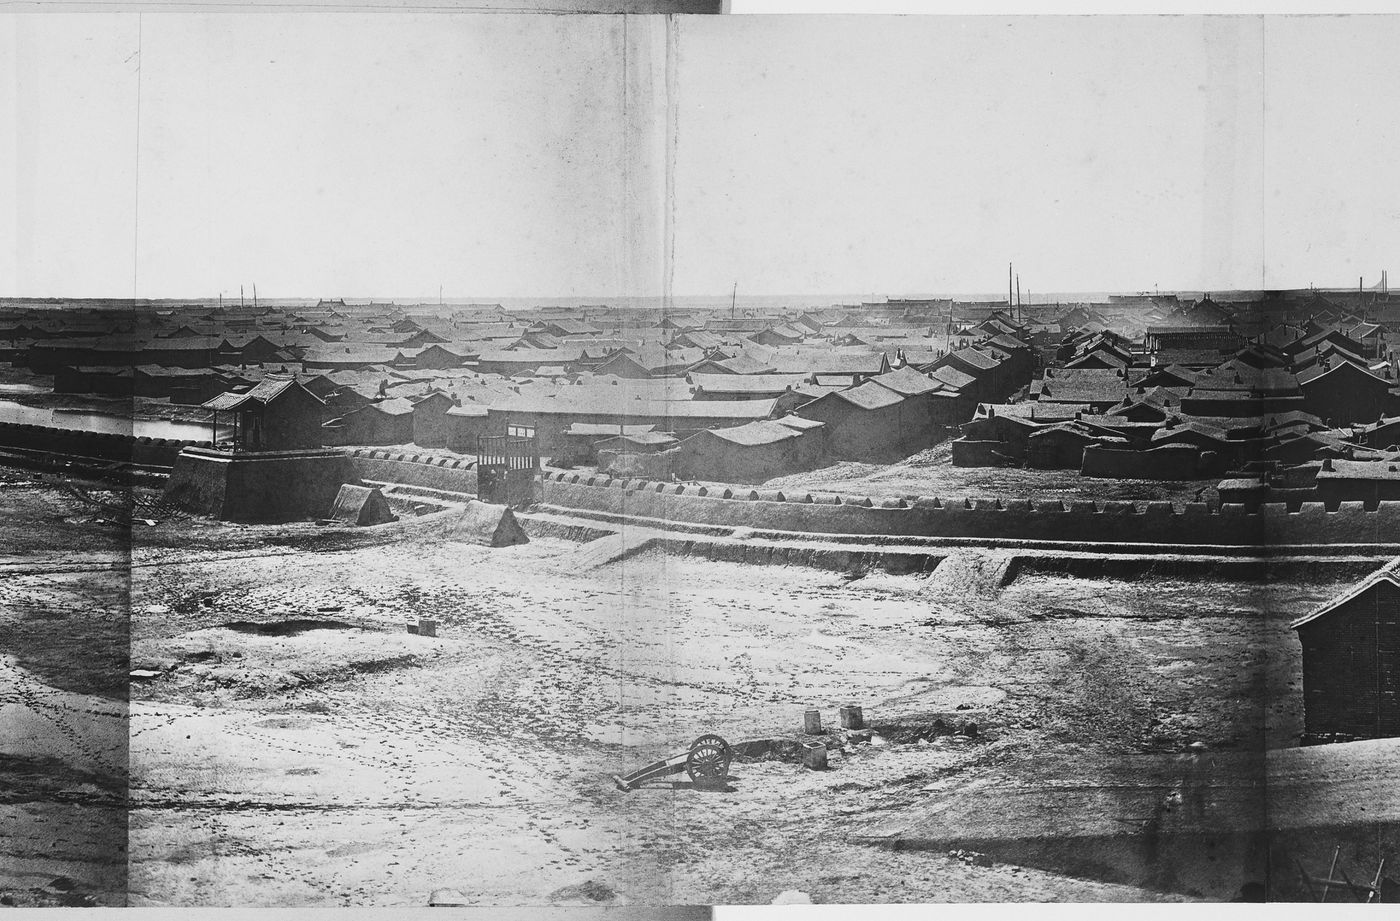 View showing the southern Pehtang Fort, the town of Pehtang (now Beitang), and the Pehtang (now Beitang) River delta, with the northern Pehtang Fort in the background, near Tientsin (now Tianjin), China